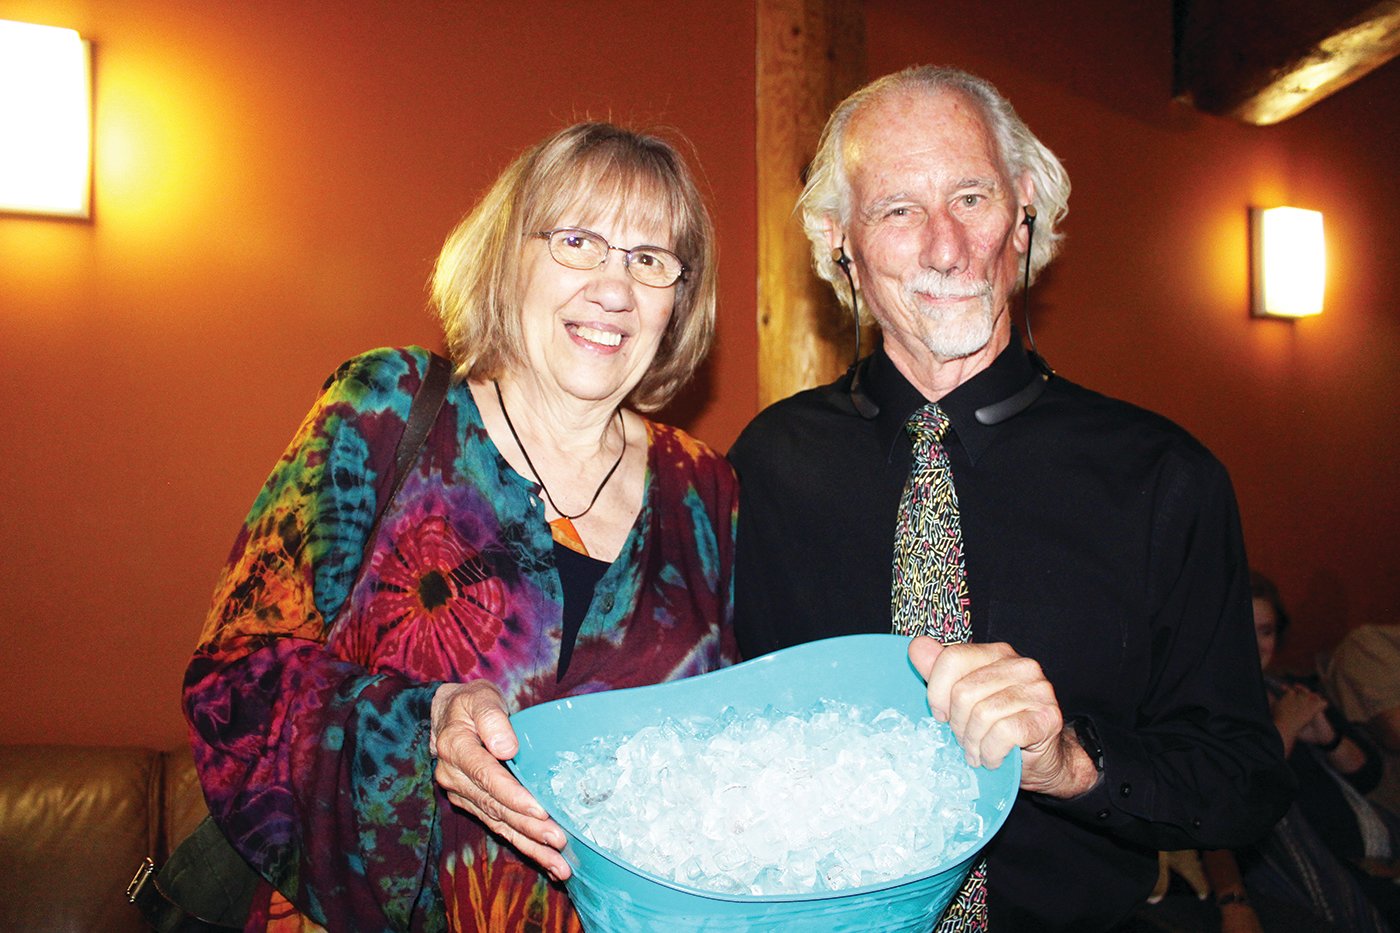 Billie and Mike Rouse brought a bucket of ice to the surprise announcement that Ely Memorial has won the rights to put on the Broadway musical version of Disney’s Frozen.